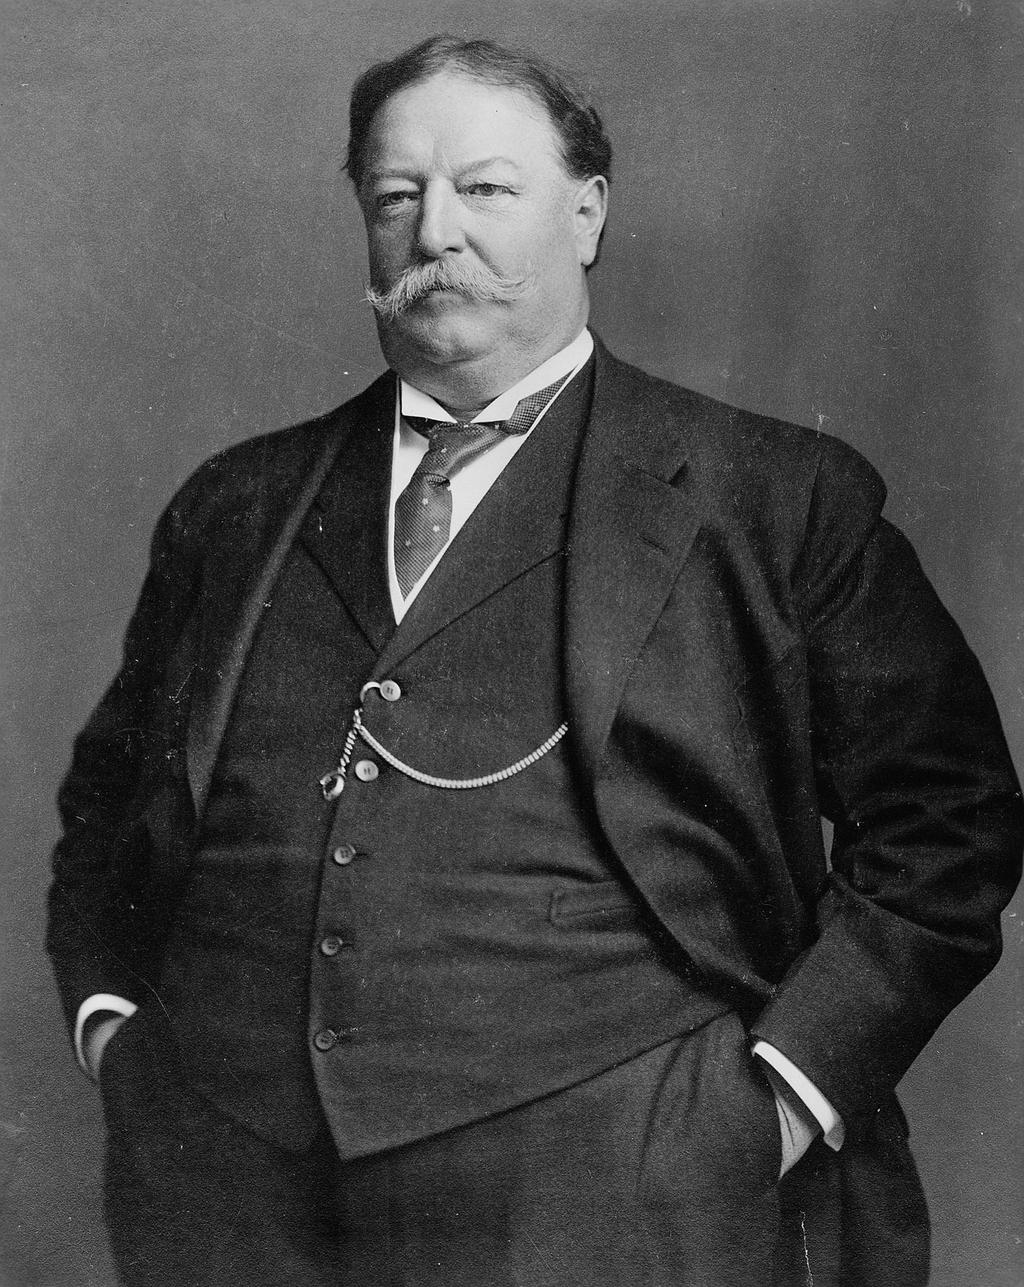 policies of TR Broke up more trusts than Roosevelt continued conservationist